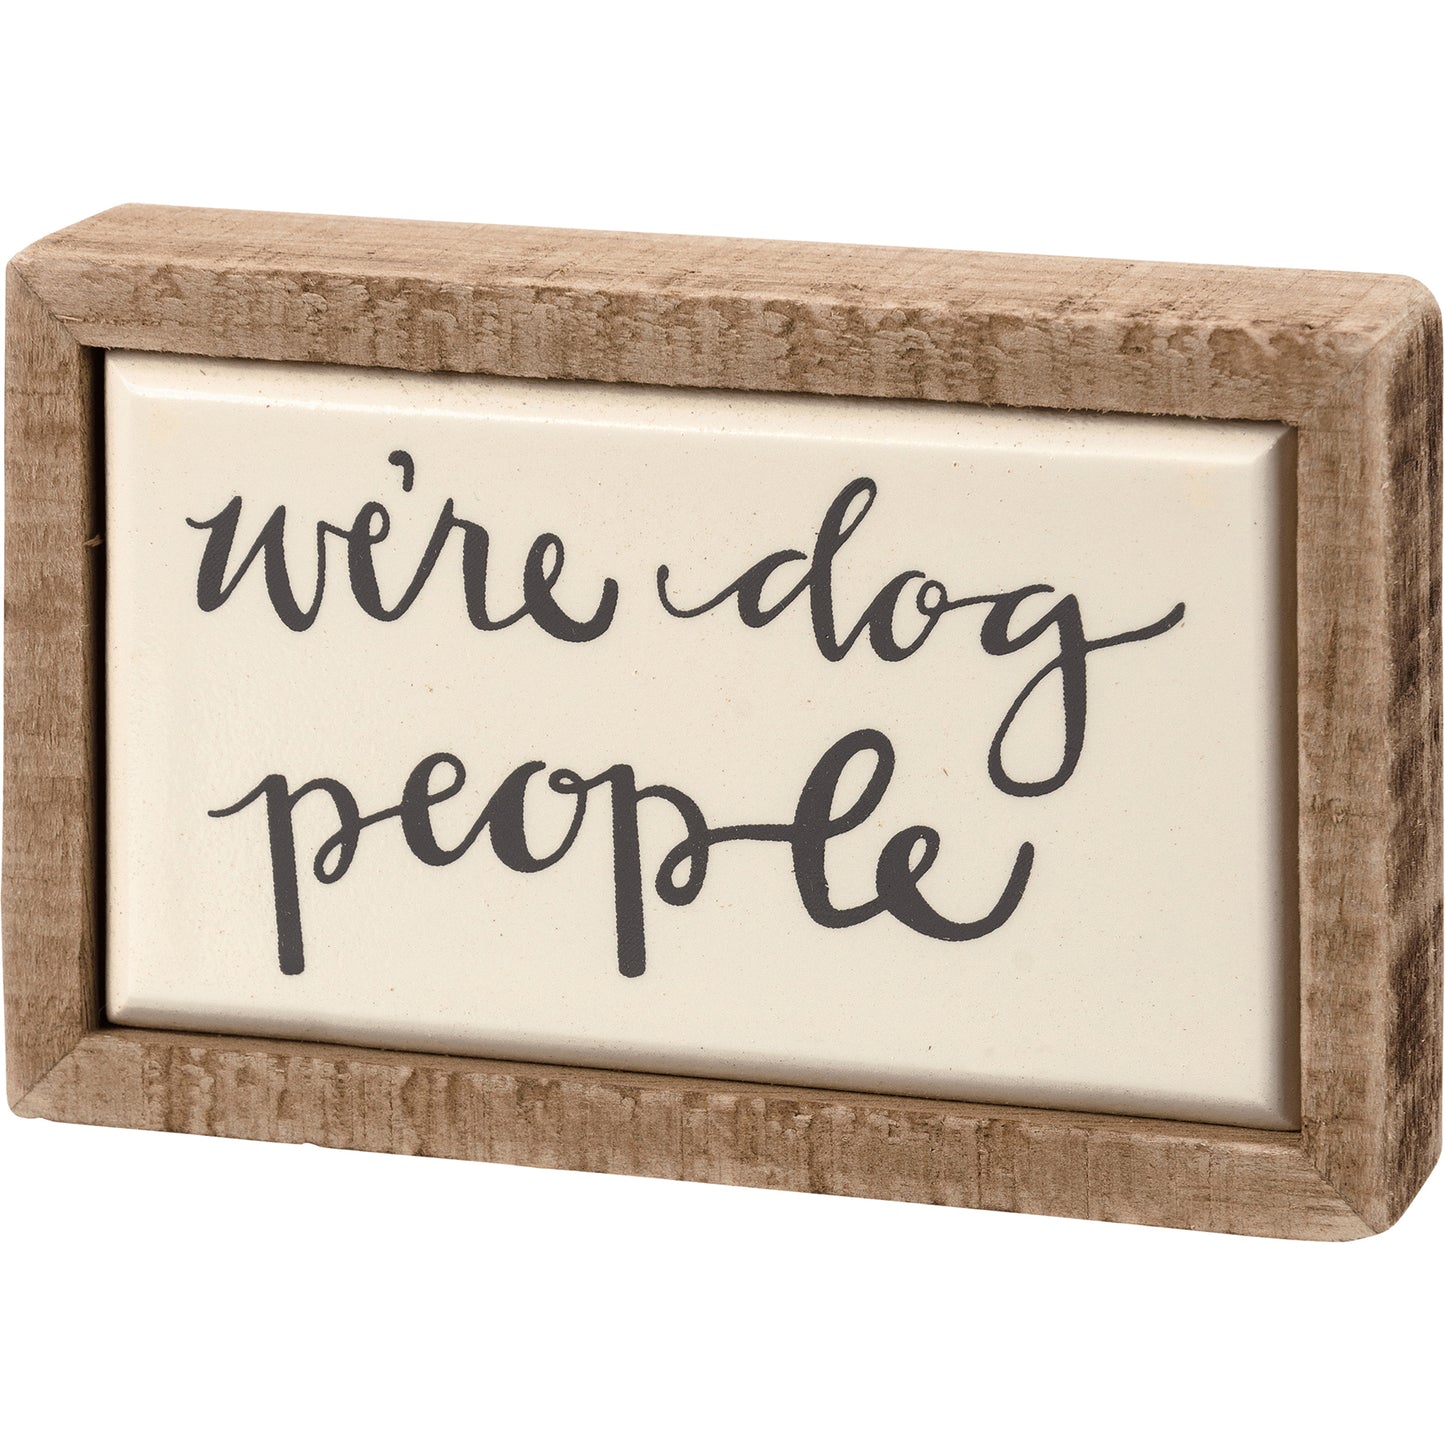 Box Sign - "We're Dog People"